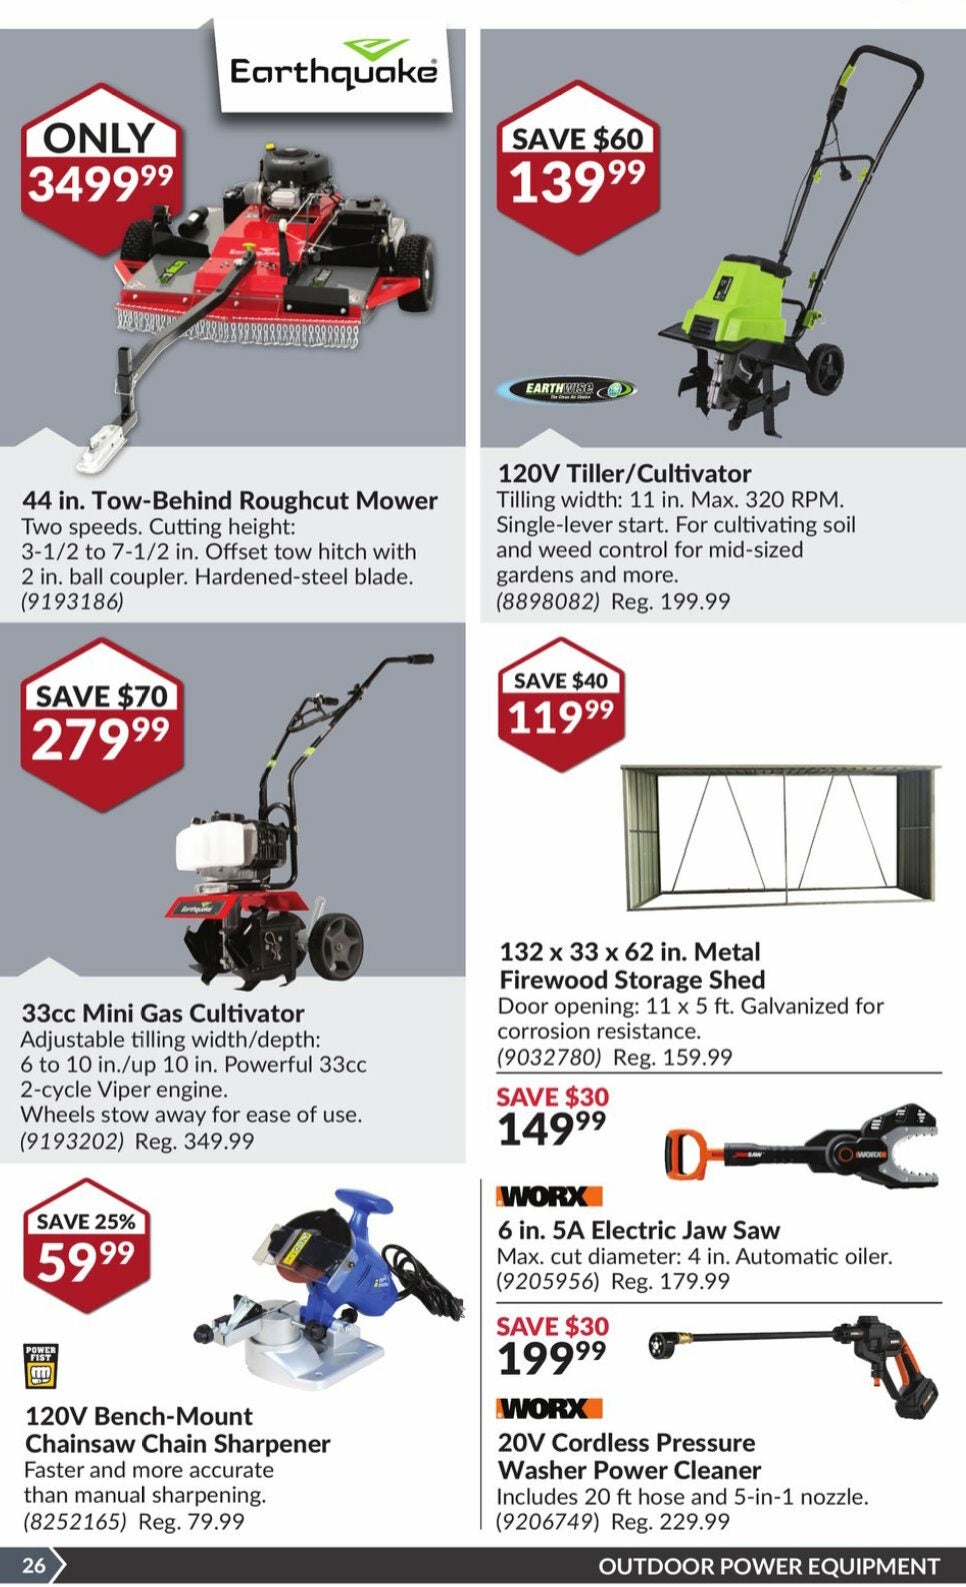 Princess Auto Weekly Flyer - 2 Week Sale - Helping You Indoors & Out - Apr  9 – 21 